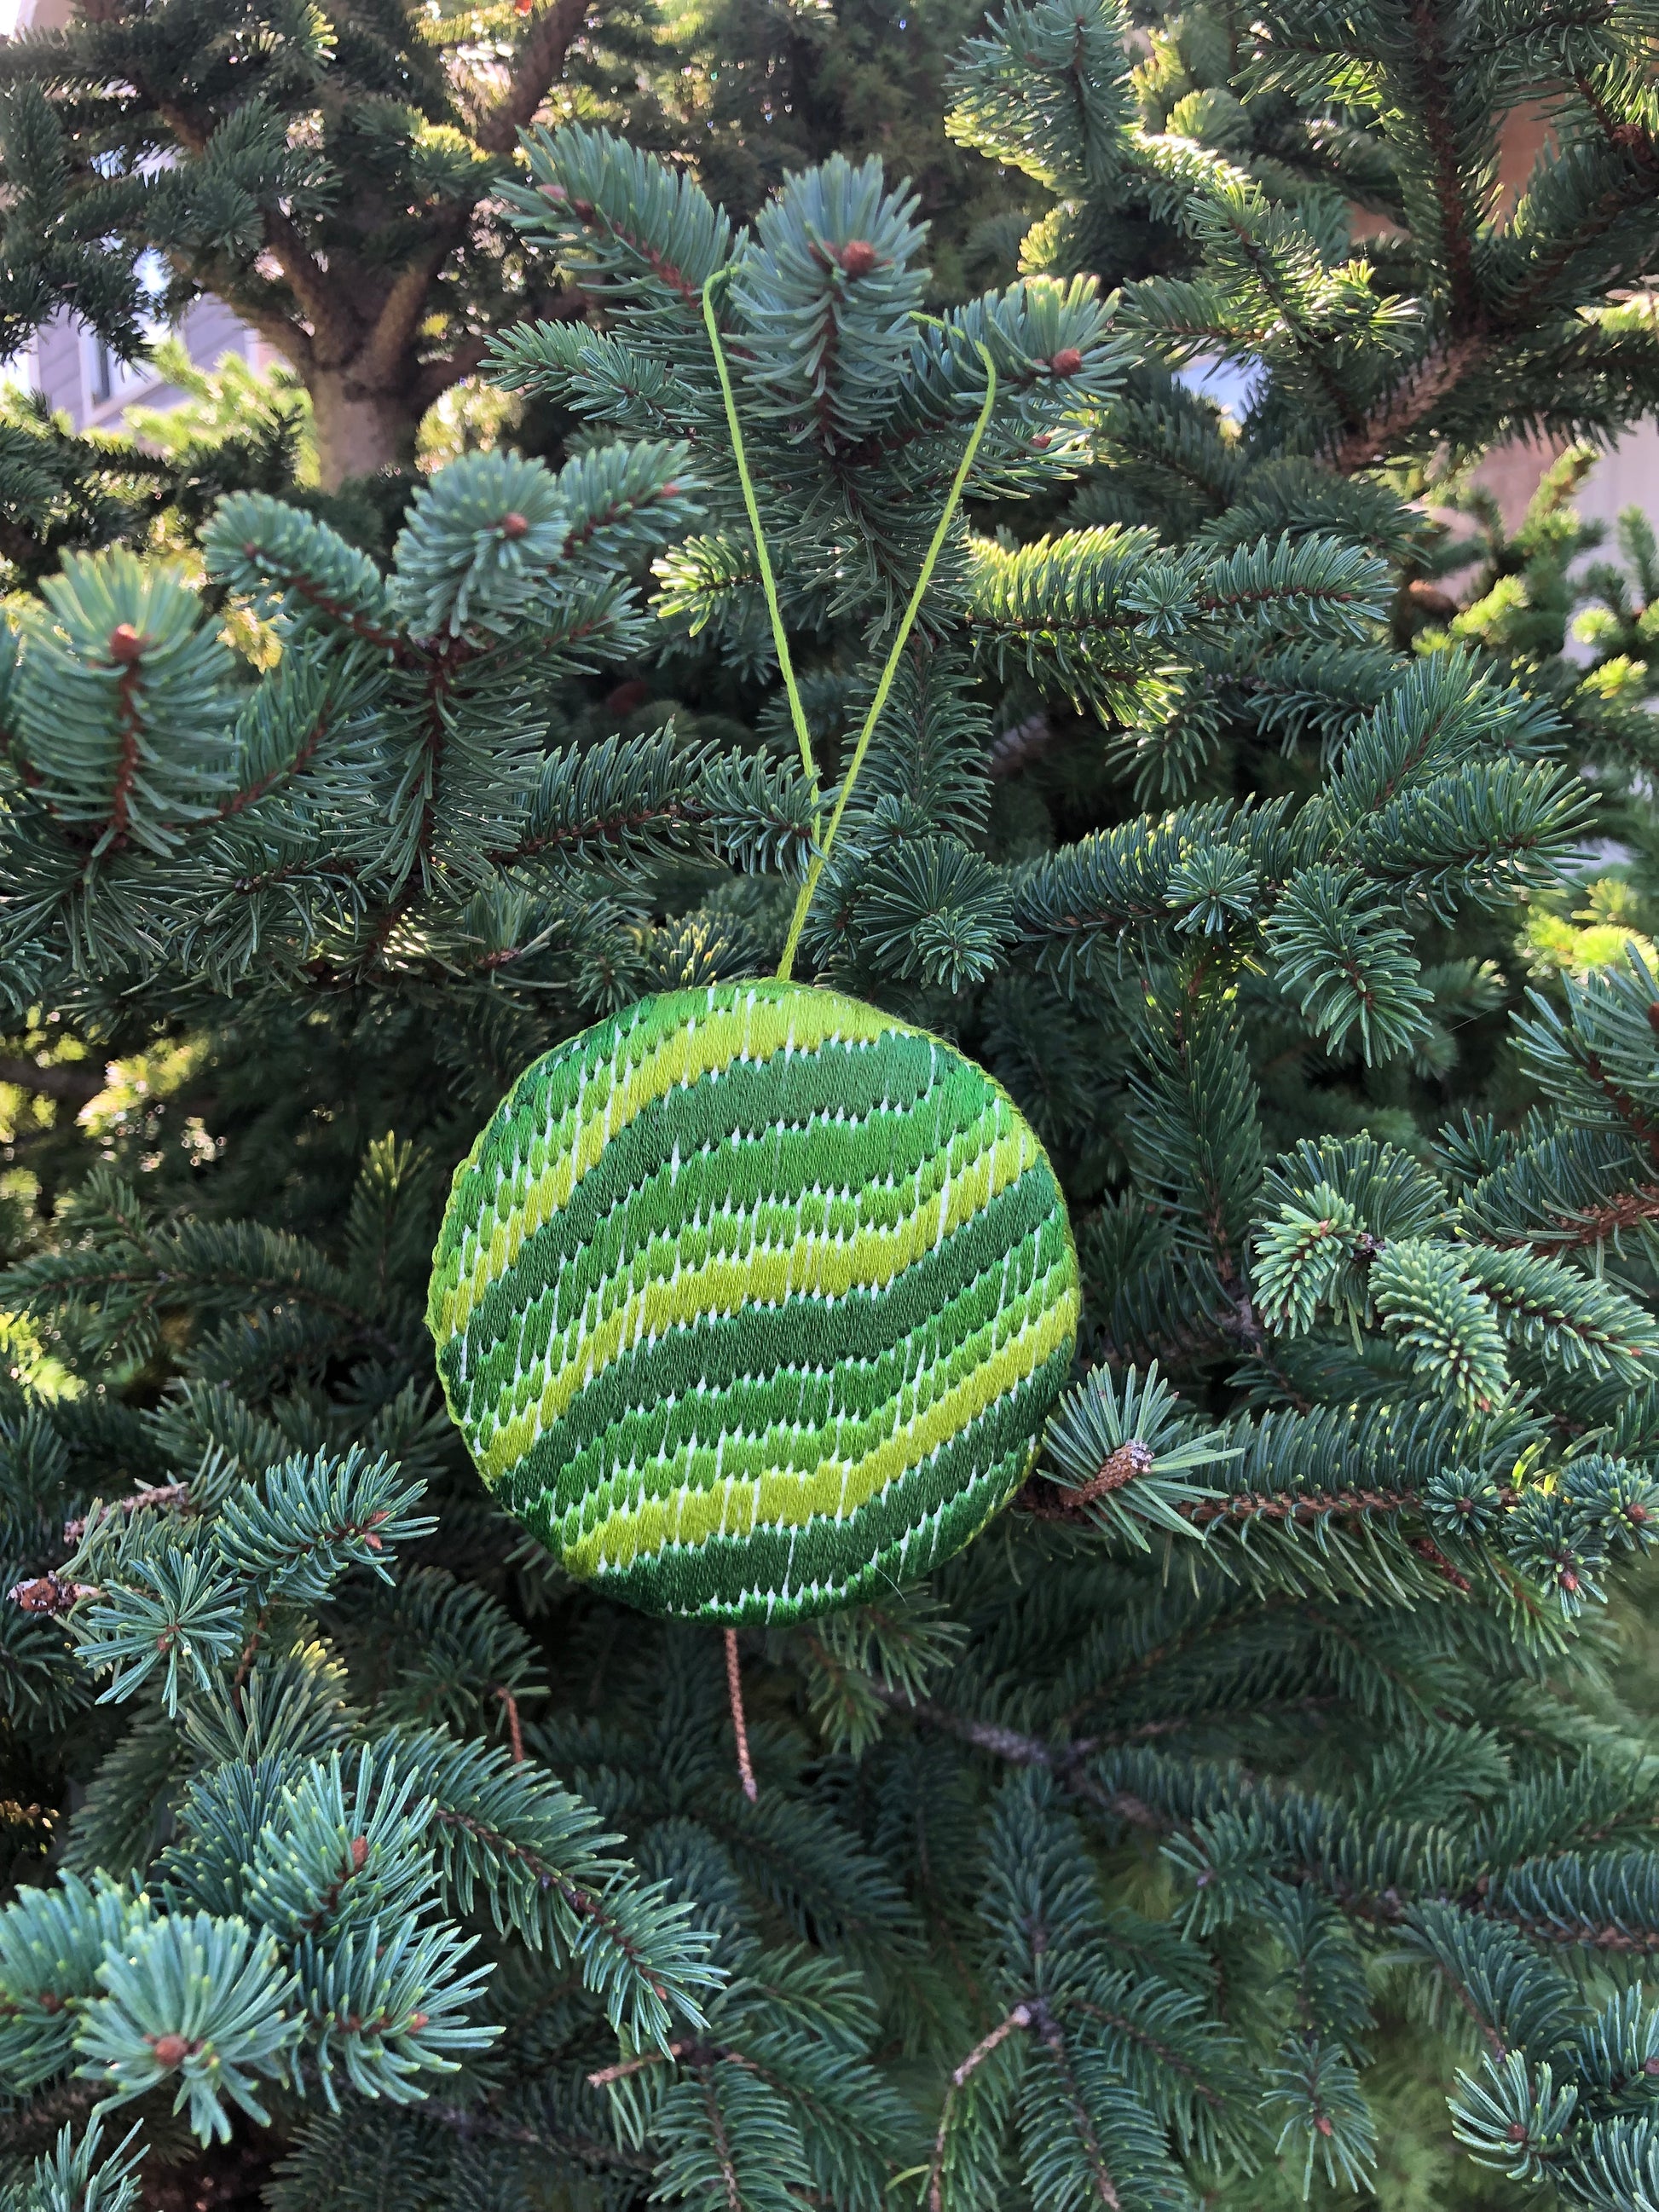 green ornament with bargello embroidery.